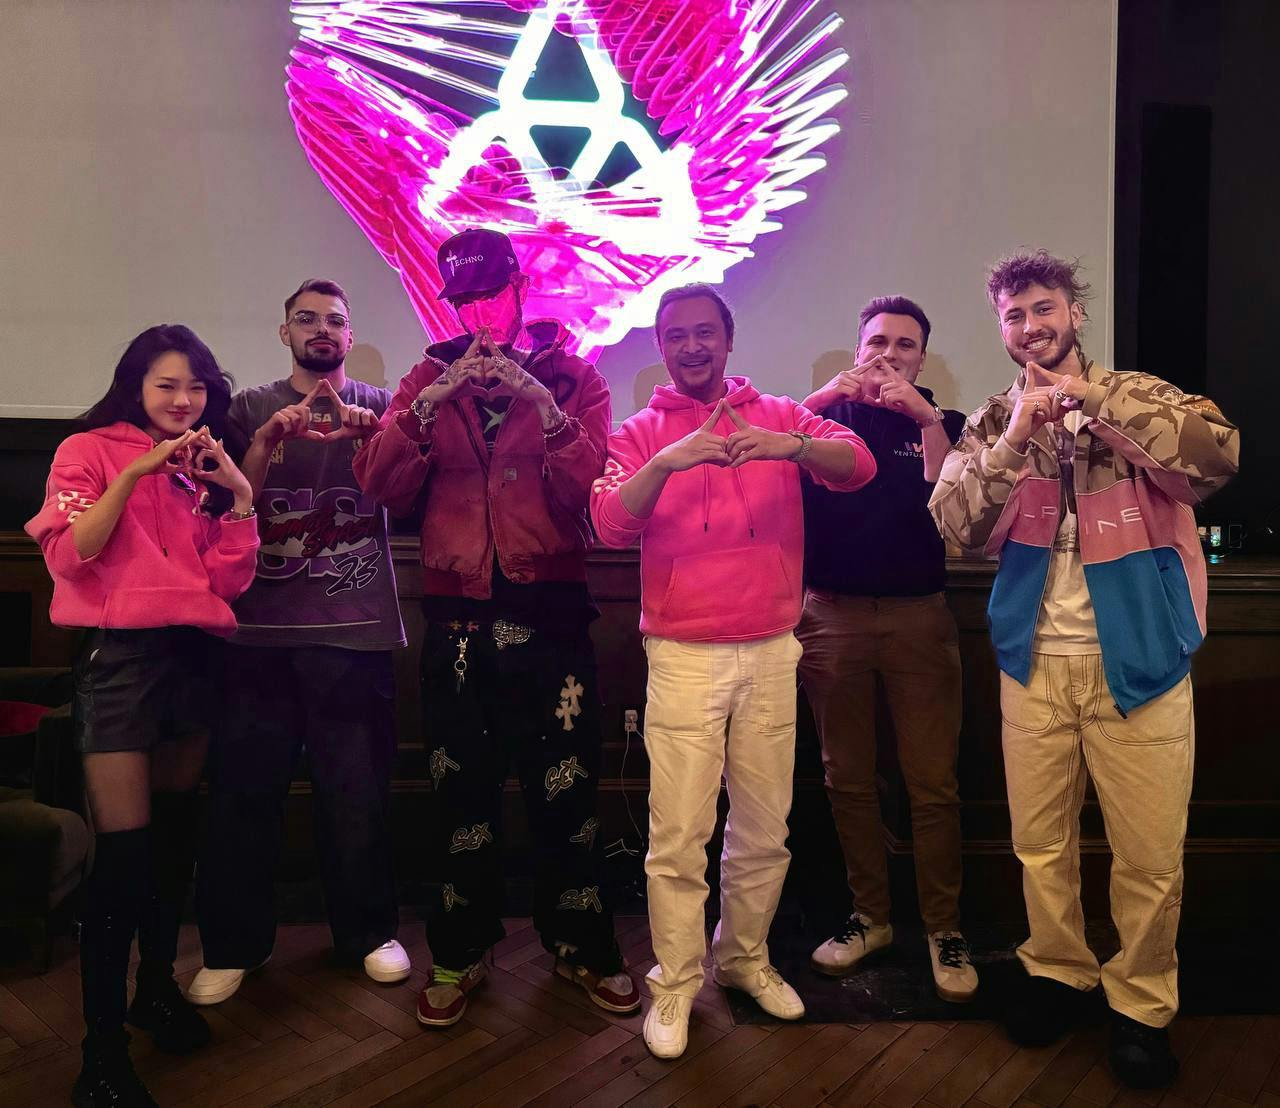 There were many special guests in attendance, including Faze Banks, Cr0ss, Crypto Max and ThreadGuy!